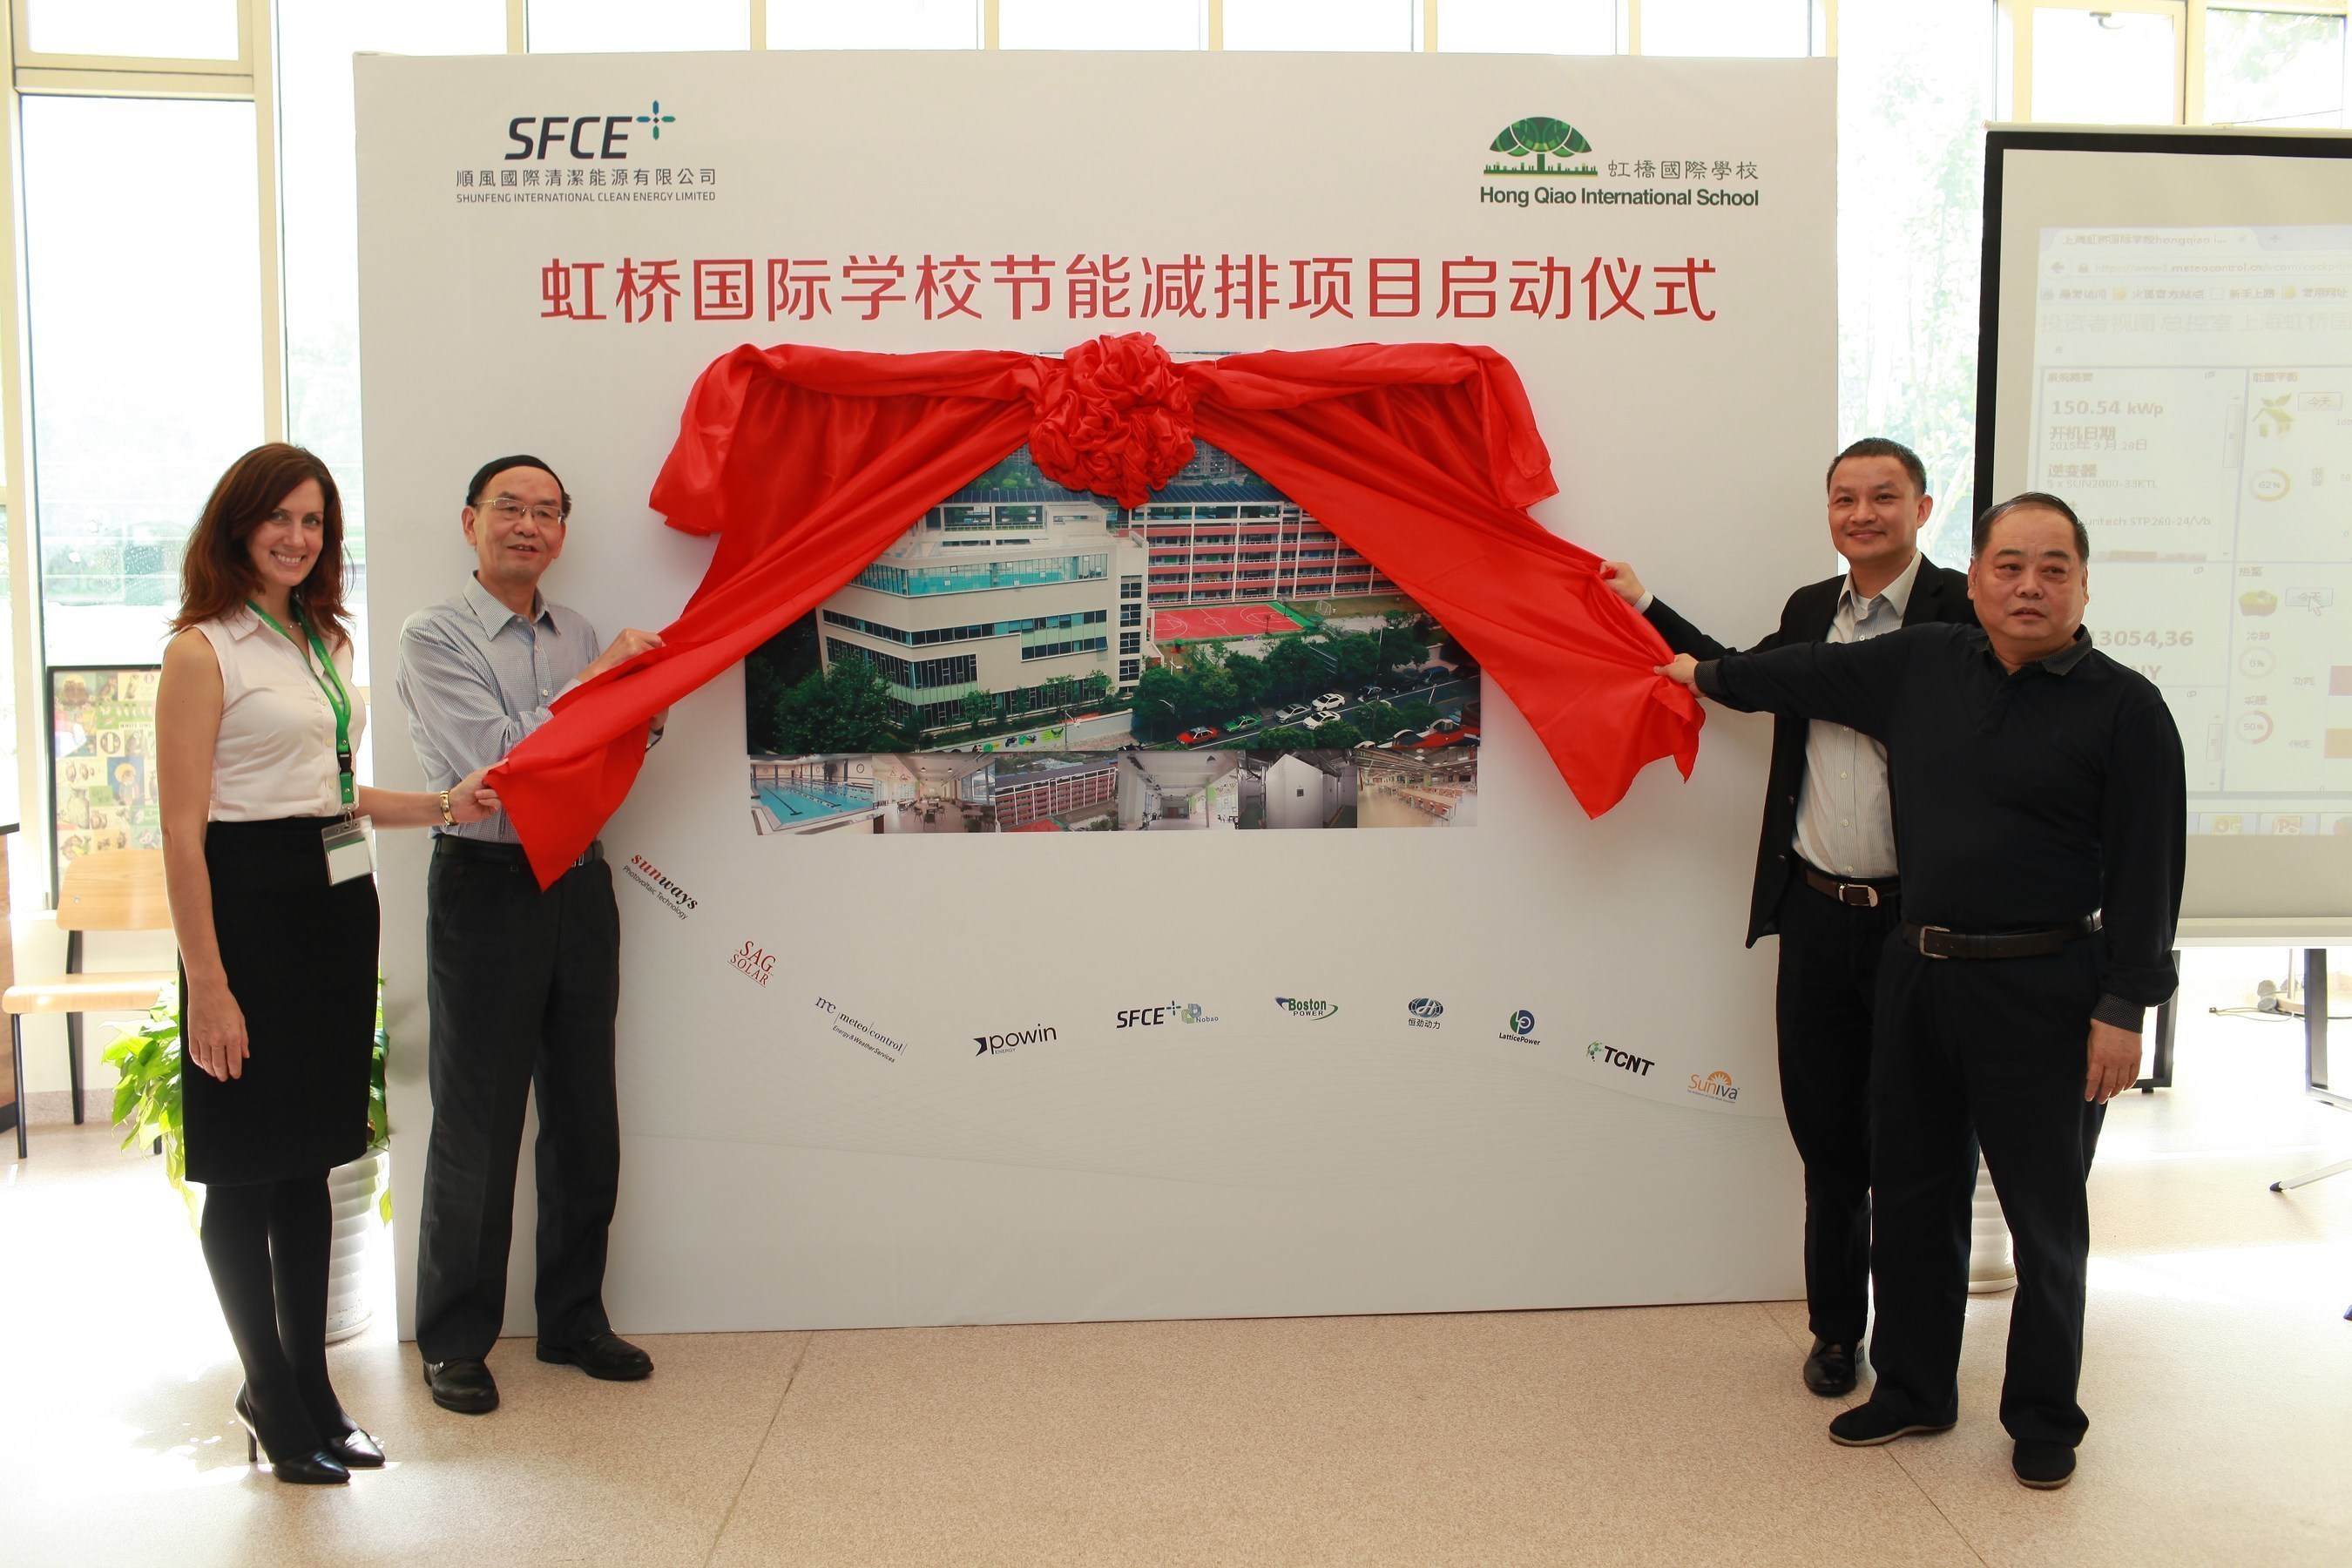 Senior leaders and guests unveiled SFCE's integrated clean energy system at the Shanghai Hong Qiao International School (From the left: Hong Qiao International School Principal Rebecca Zipprich, Representative from China Association of Higher Education and SFCE CEO Mr. Eric Luo)